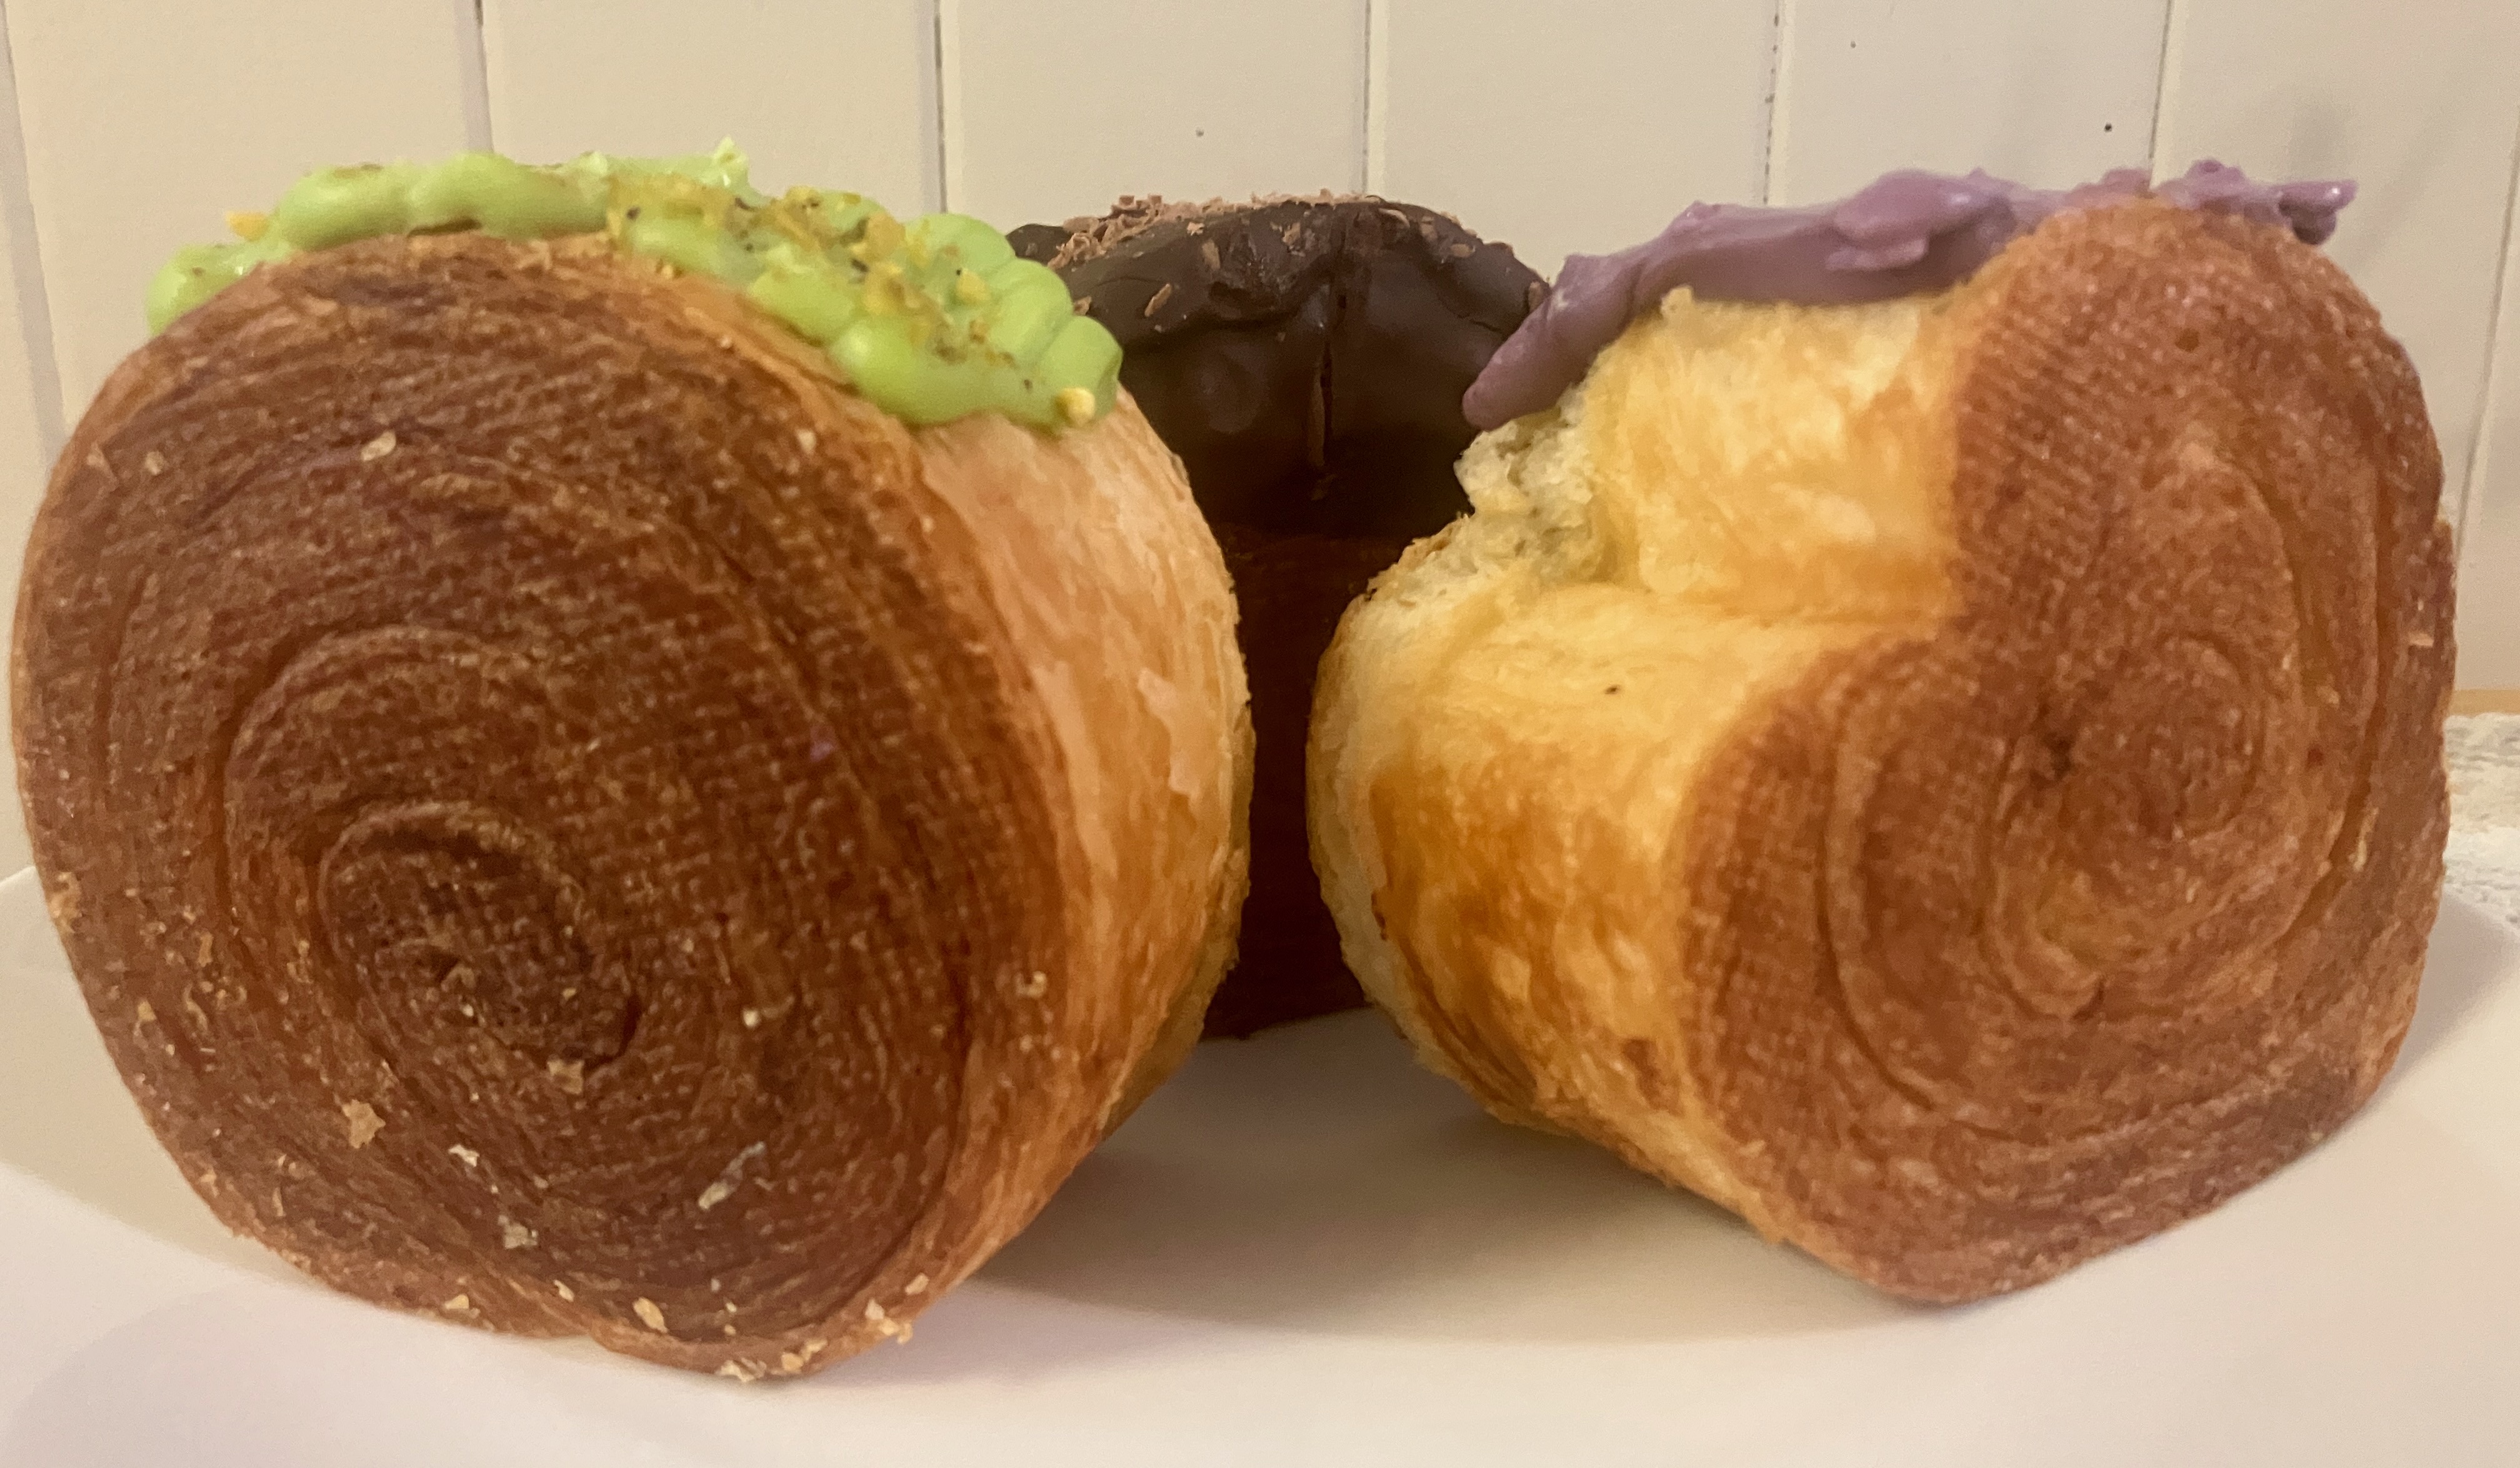 The "viral spiral" croissants at Marvel Cake, which has locations in Campbell and Palo Alto, are offered in pistachio, ube and chocolate flavors; flavors change regularly. (Kate Bradshaw/Bay Area News Group)